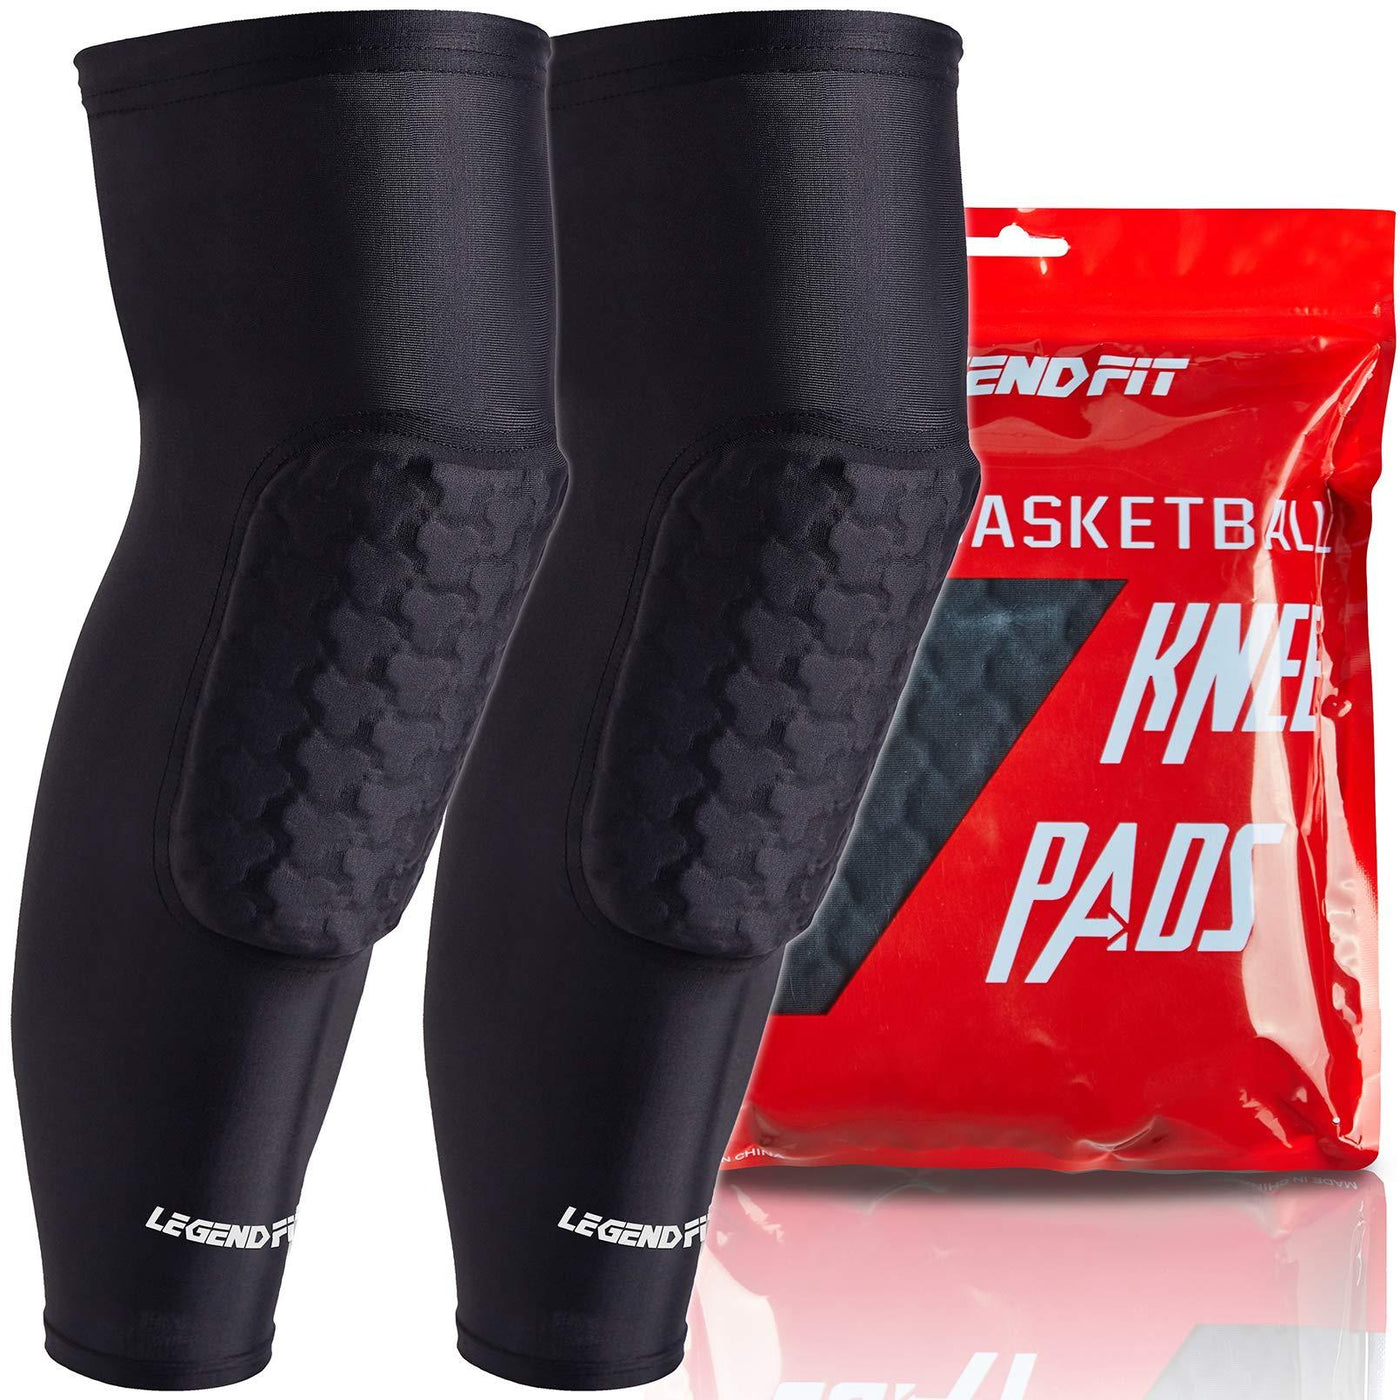 Legendfit Basketball Knee Pads for Kids Youth Adults Protective